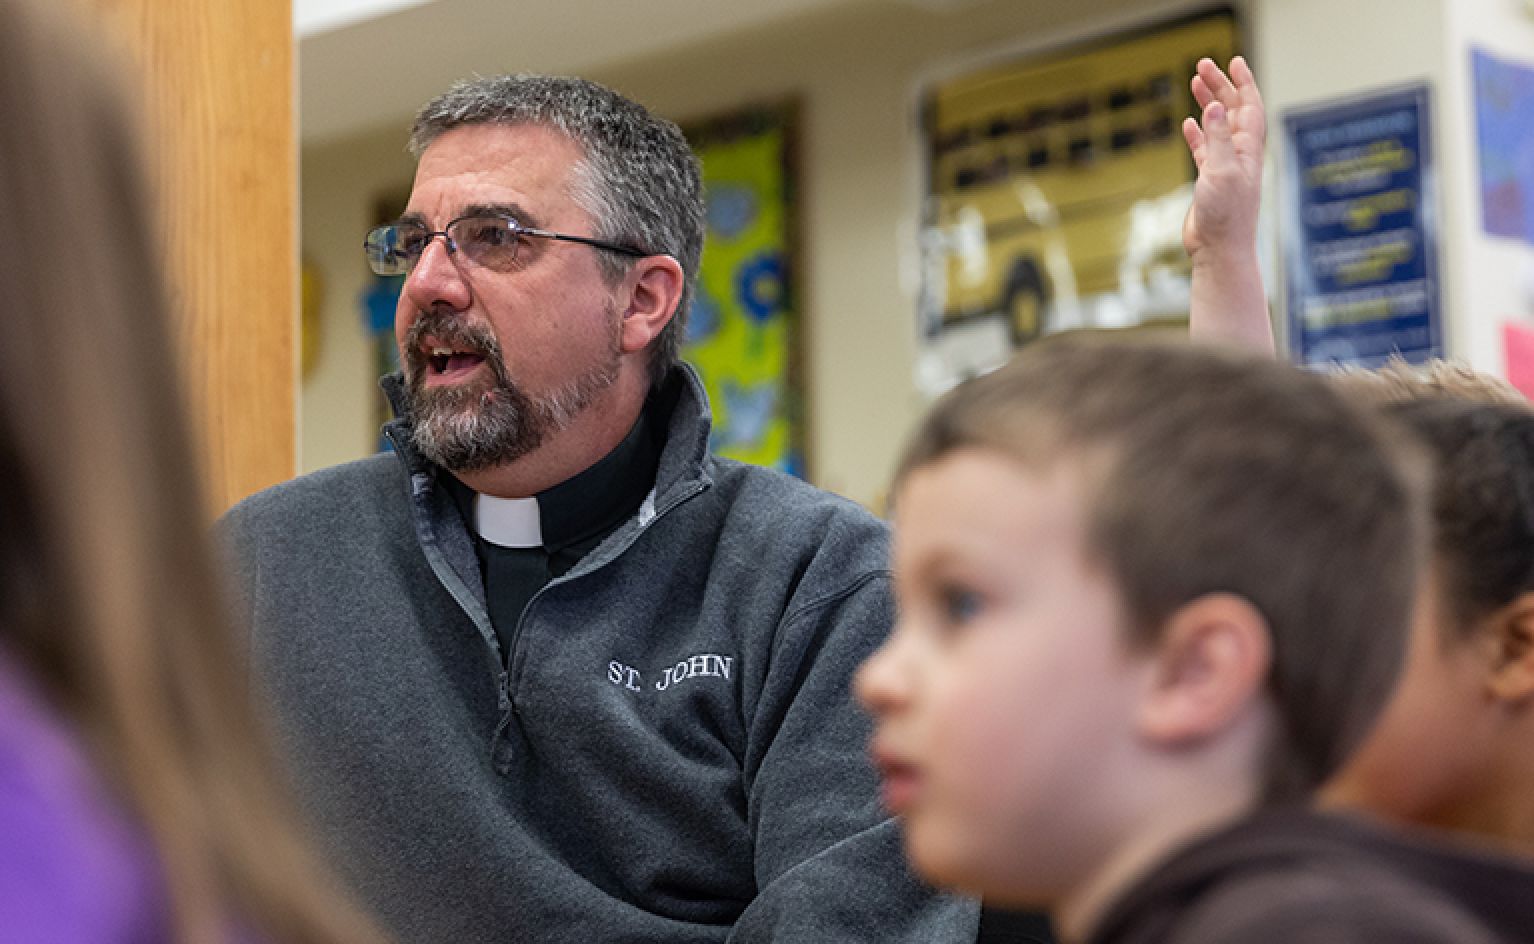 Reverend Anthony J. Smith of St. John school teaches young student